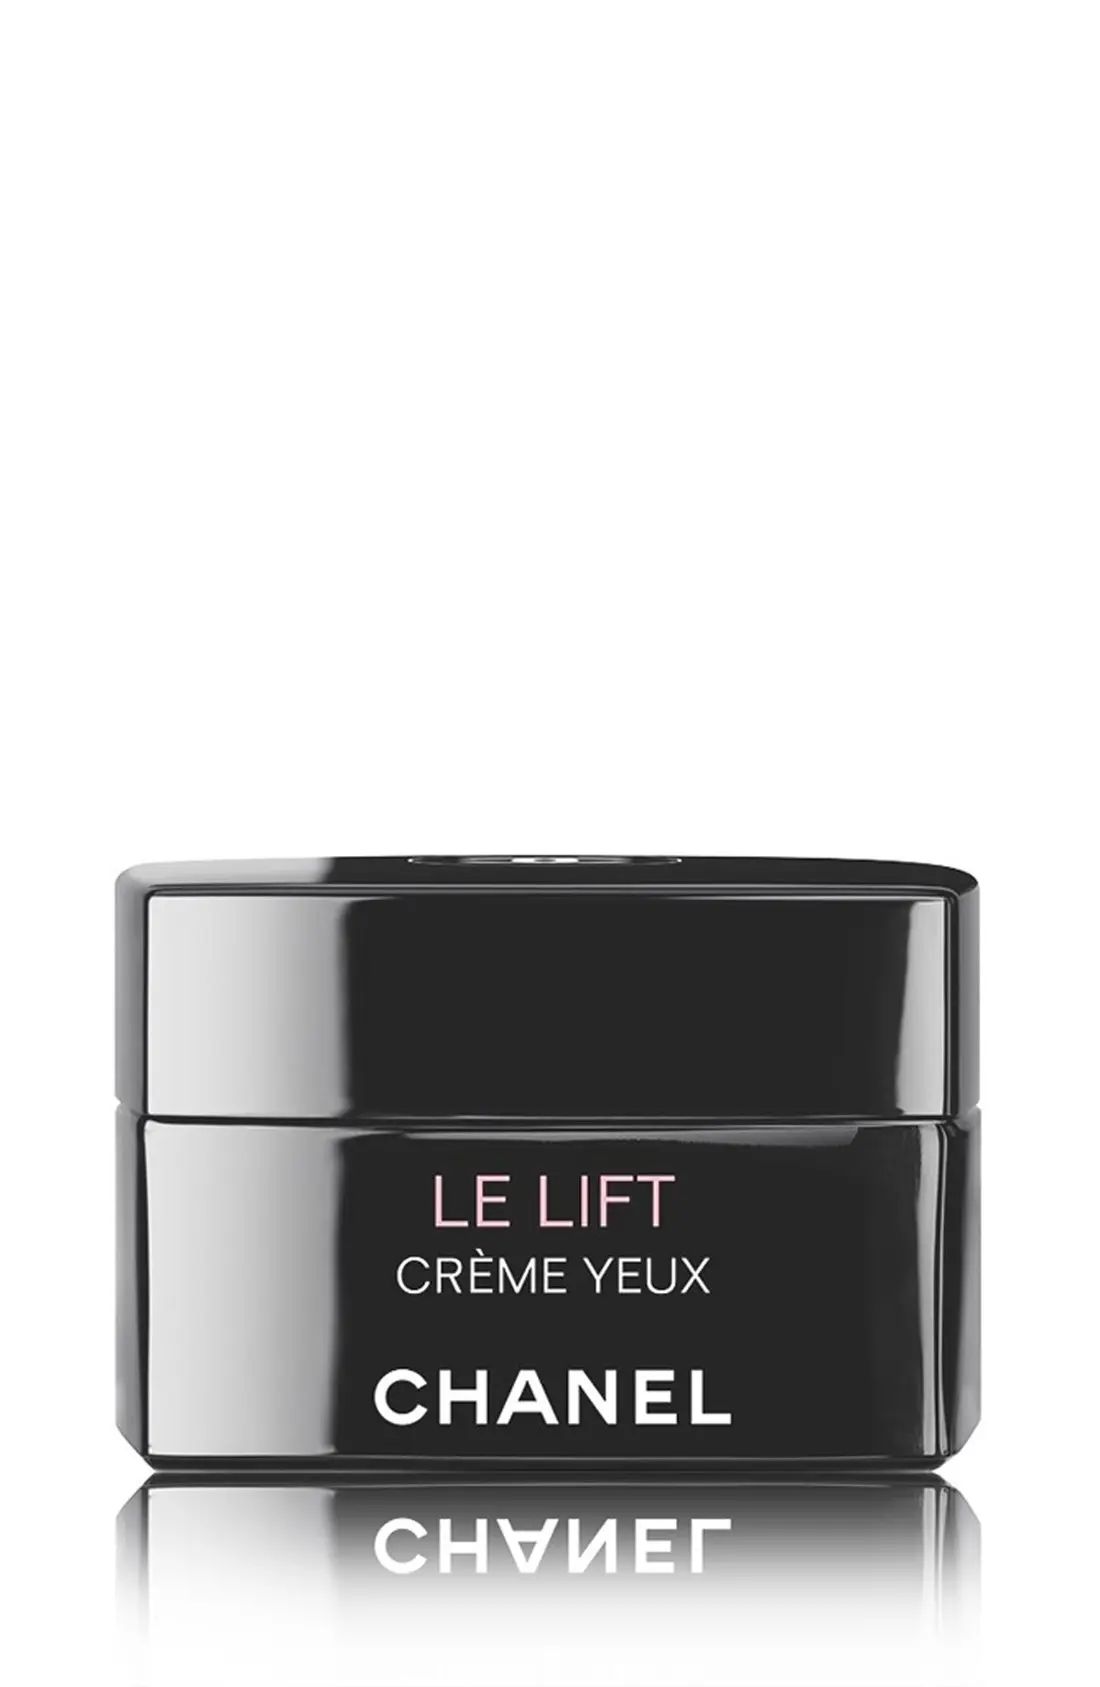 CHANEL LE LIFT CRÈME YEUX Firming Anti-Wrinkle Eye Cream | Nordstrom